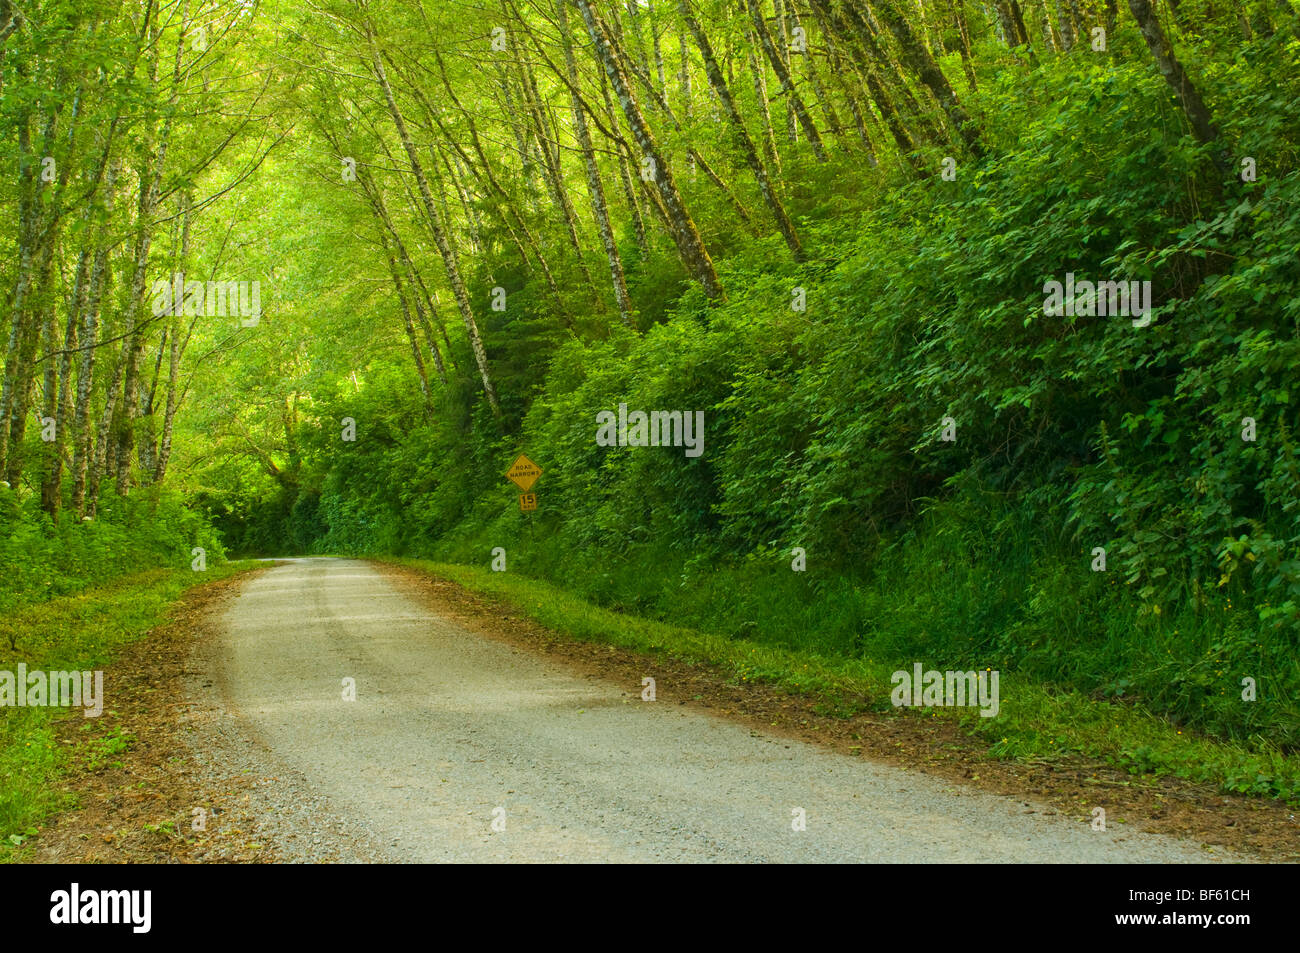 Rural dirt road through green trees and forest along the Coastal Drive, Redwood National Park, California Stock Photo